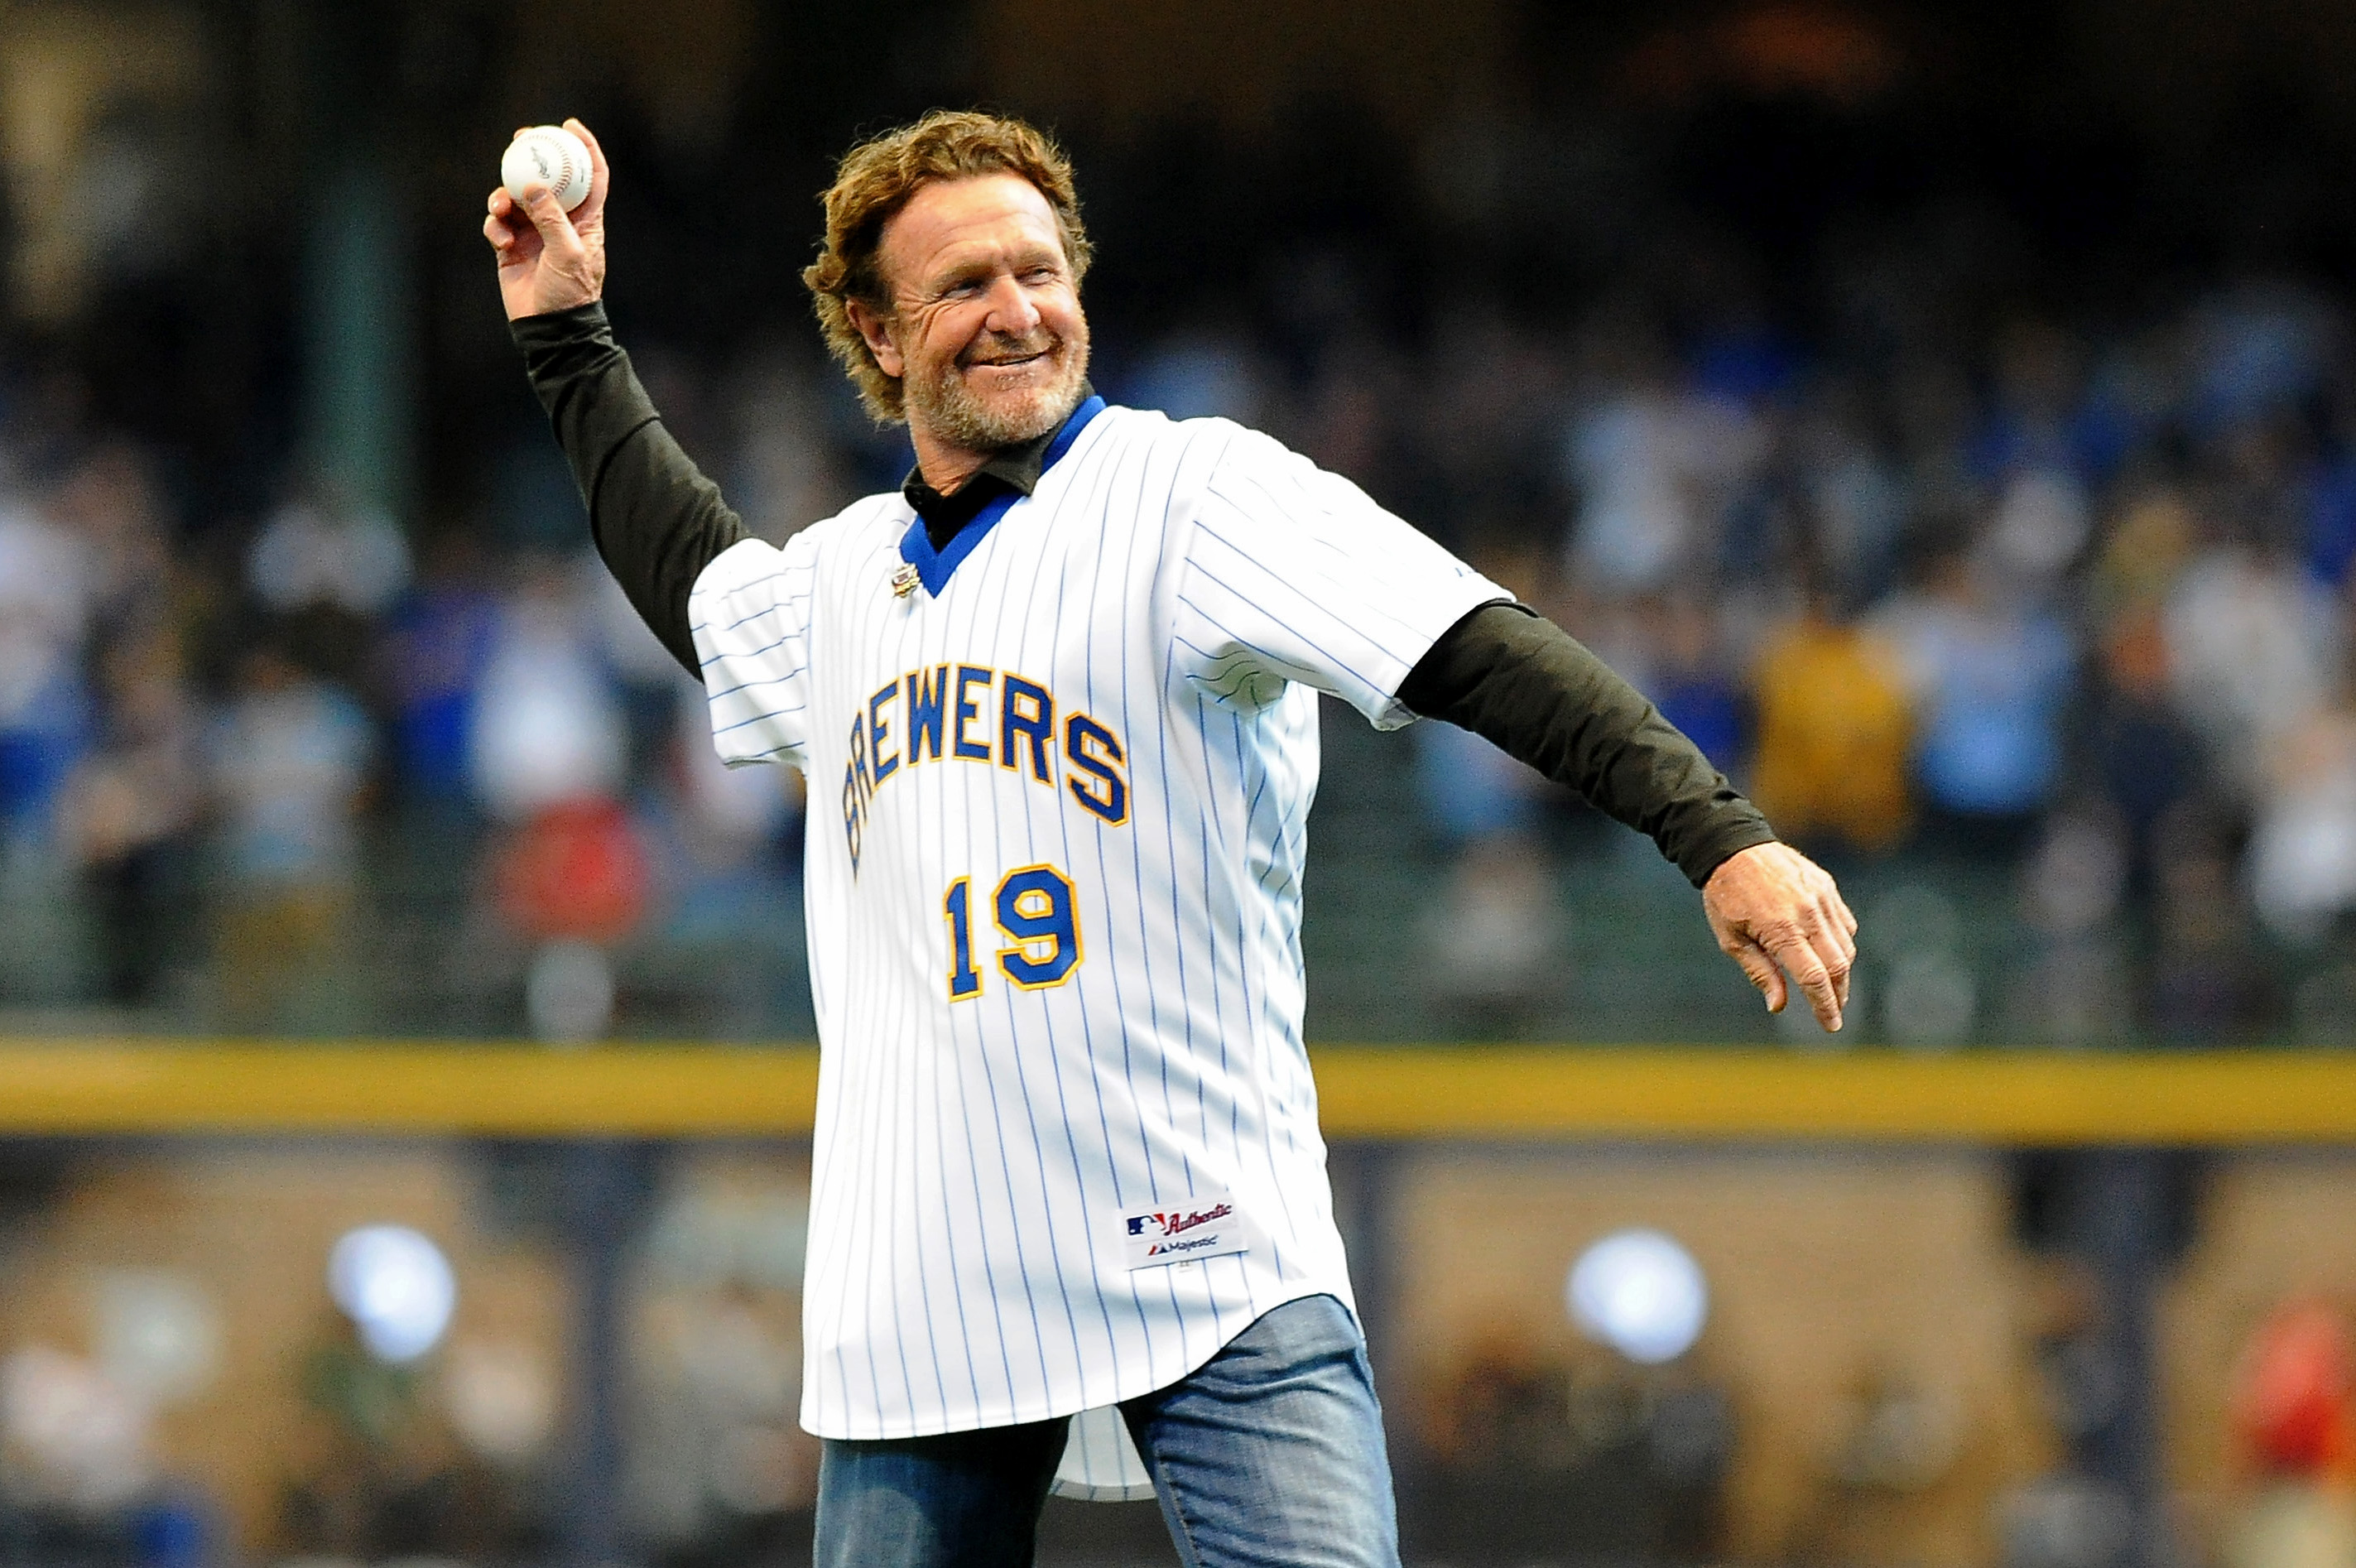 Robin Yount prevented 1973 Milwaukee Brewers' draft from being a bust